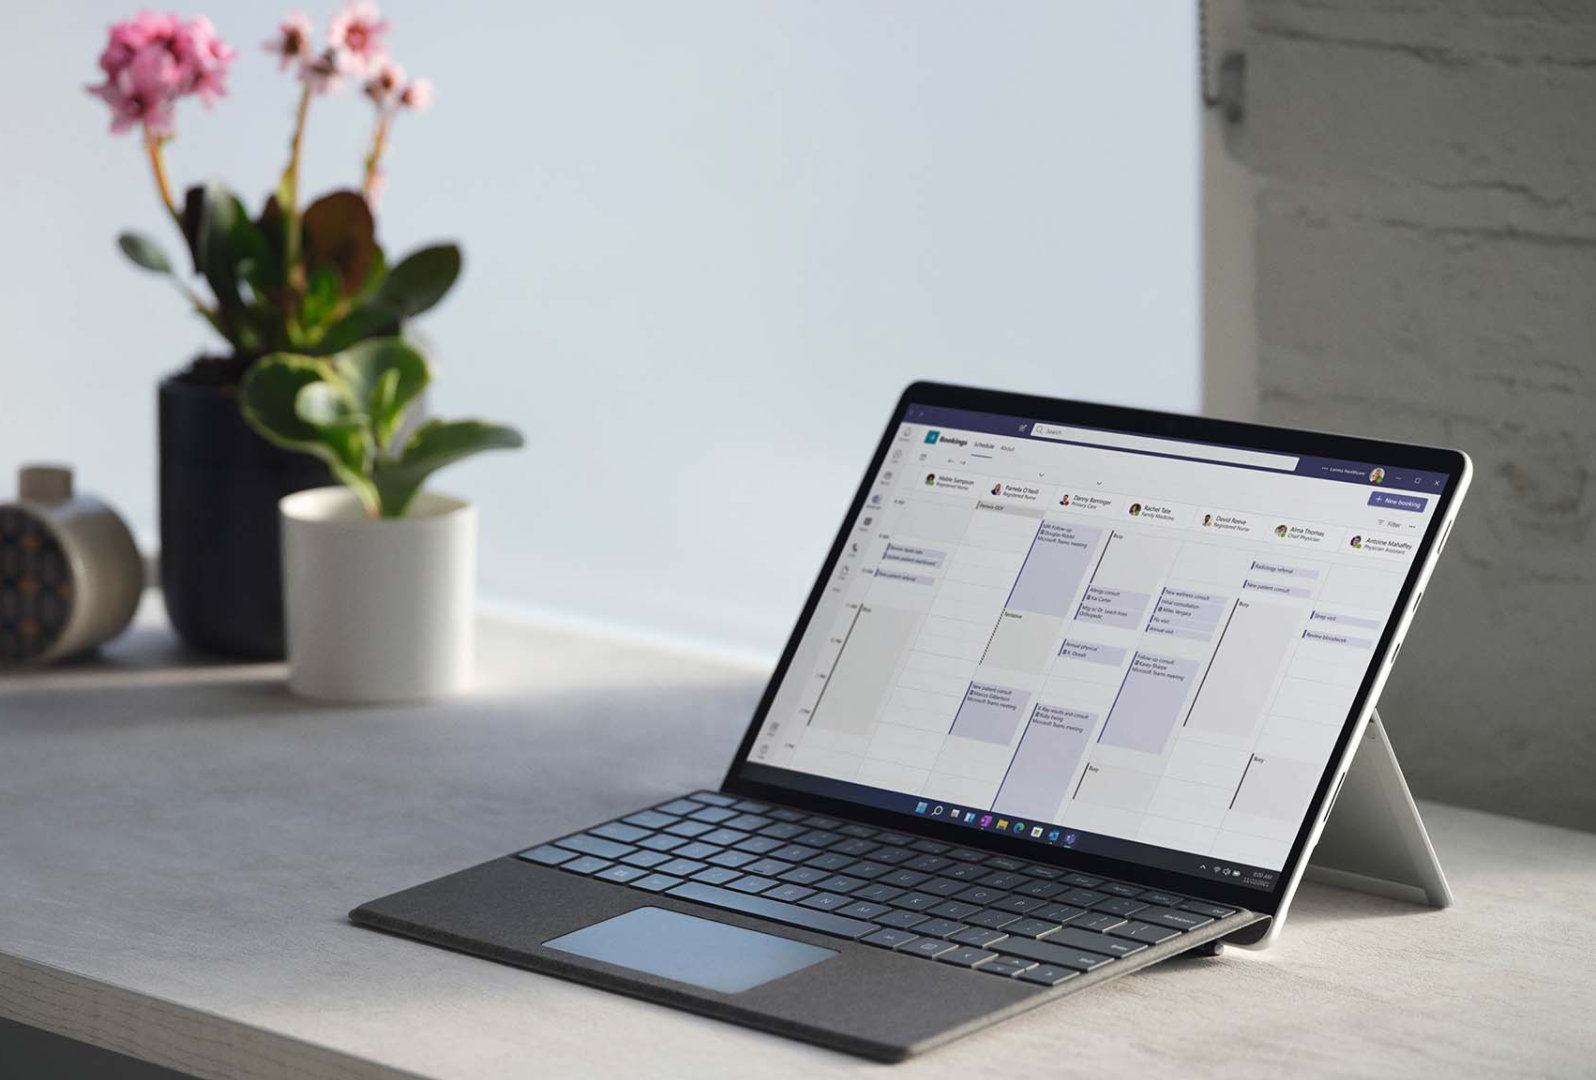 Surface Pro 8 is observed on a home office desk